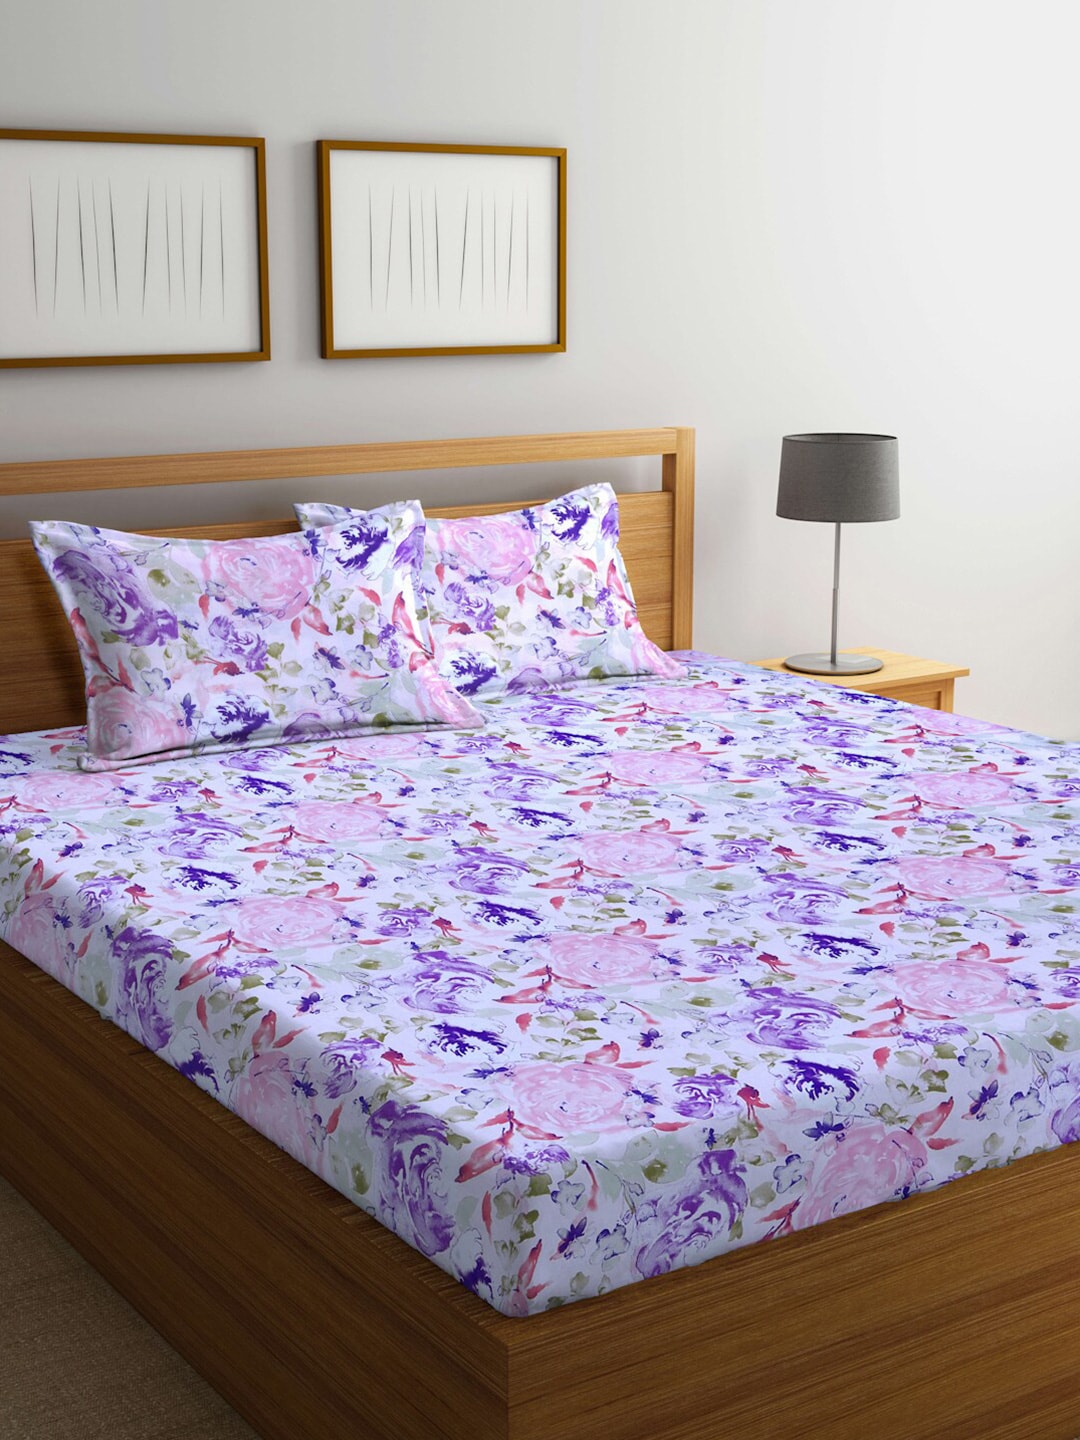 BOMBAY DYEING Floral Printed 144 TC Cotton Queen Bedsheet with 2 Pillow Covers Price in India